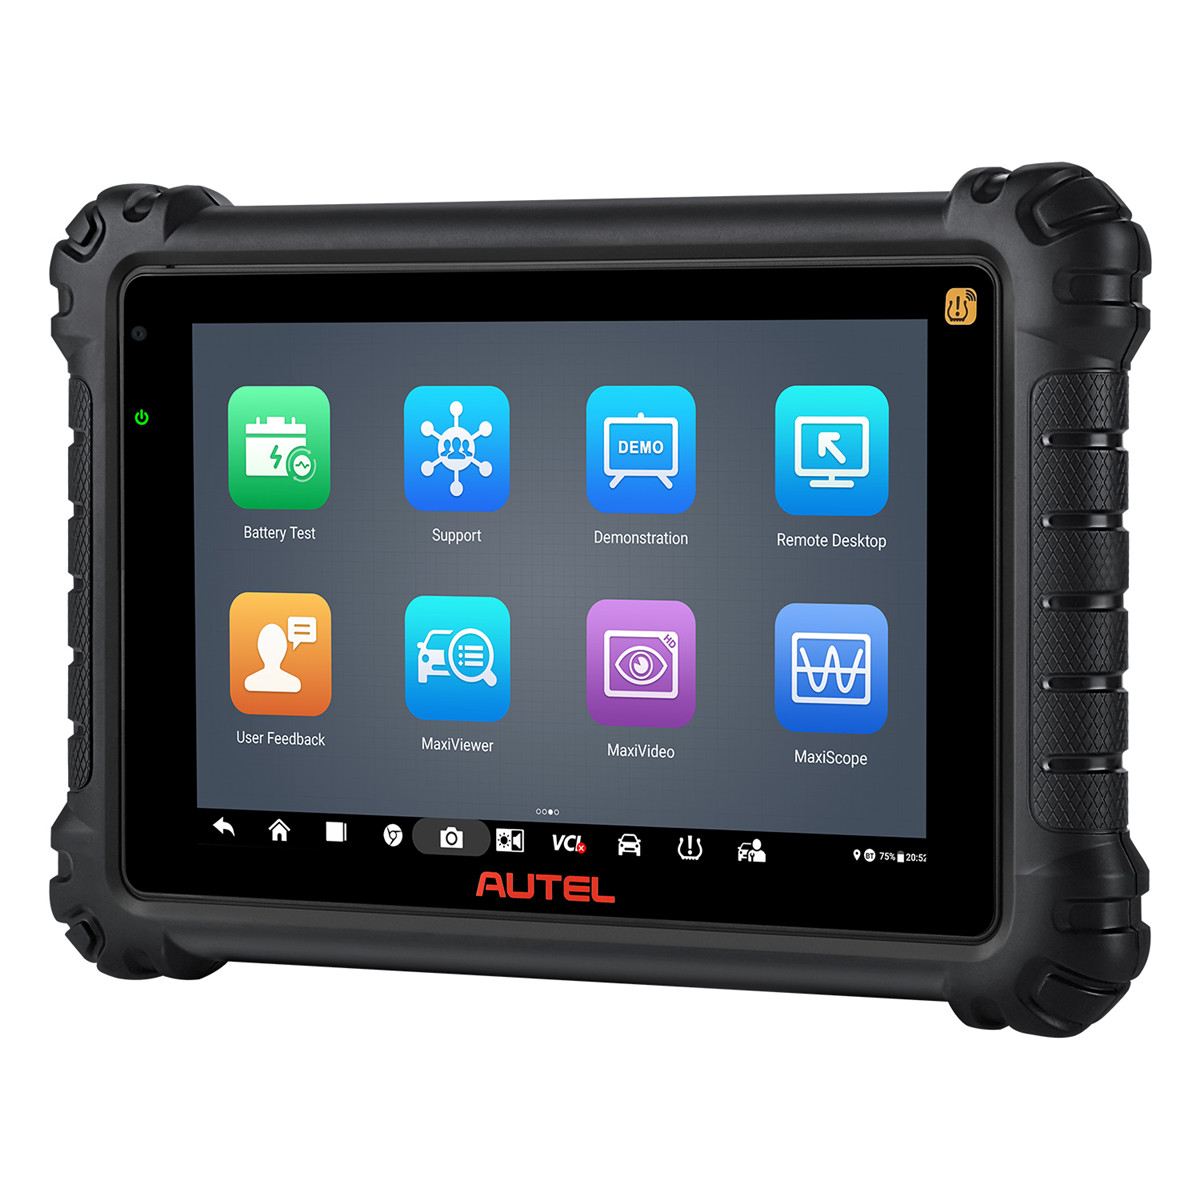 Autel MaxiSys MS906Pro Scan Tool: 2024 Newer Model of MS906/ MS906BT/  MK906BT Car Diagnostic Scanner, ECU Coding, 36+ Services, Active Test, All